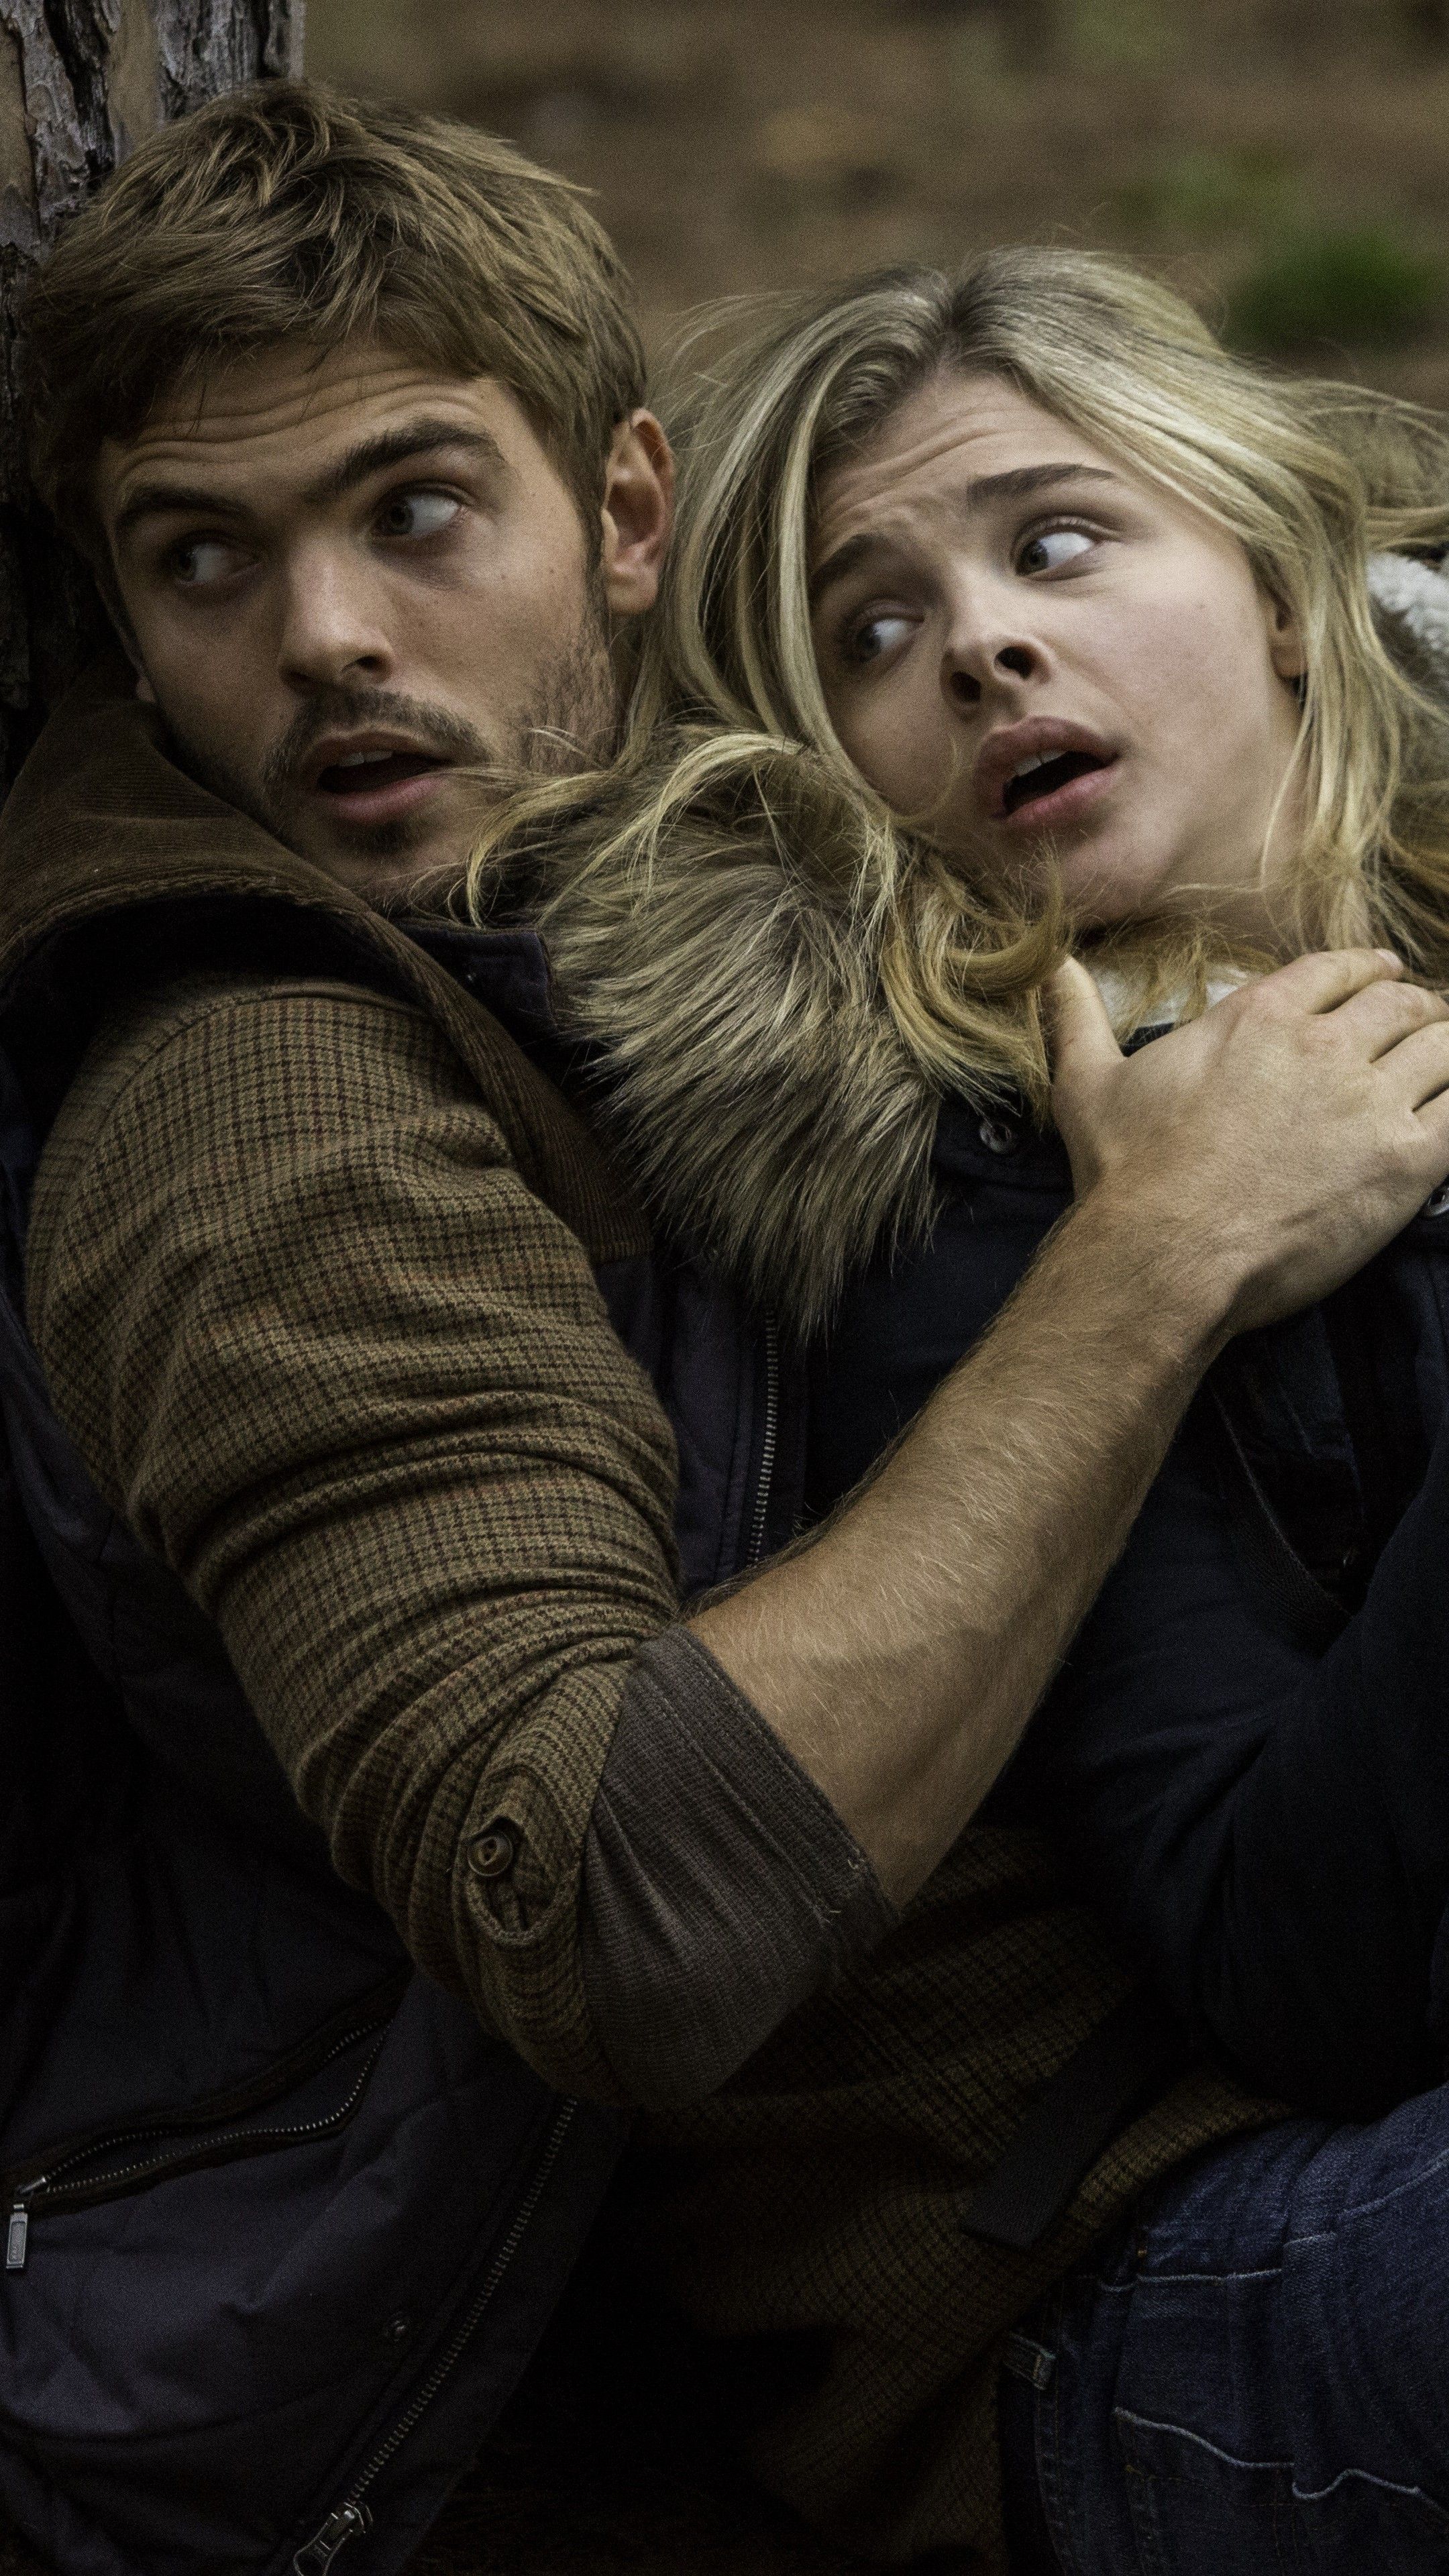 Wallpaper The 5th wave, Best movies, Alex Roe, Chloe Moretz, Movies